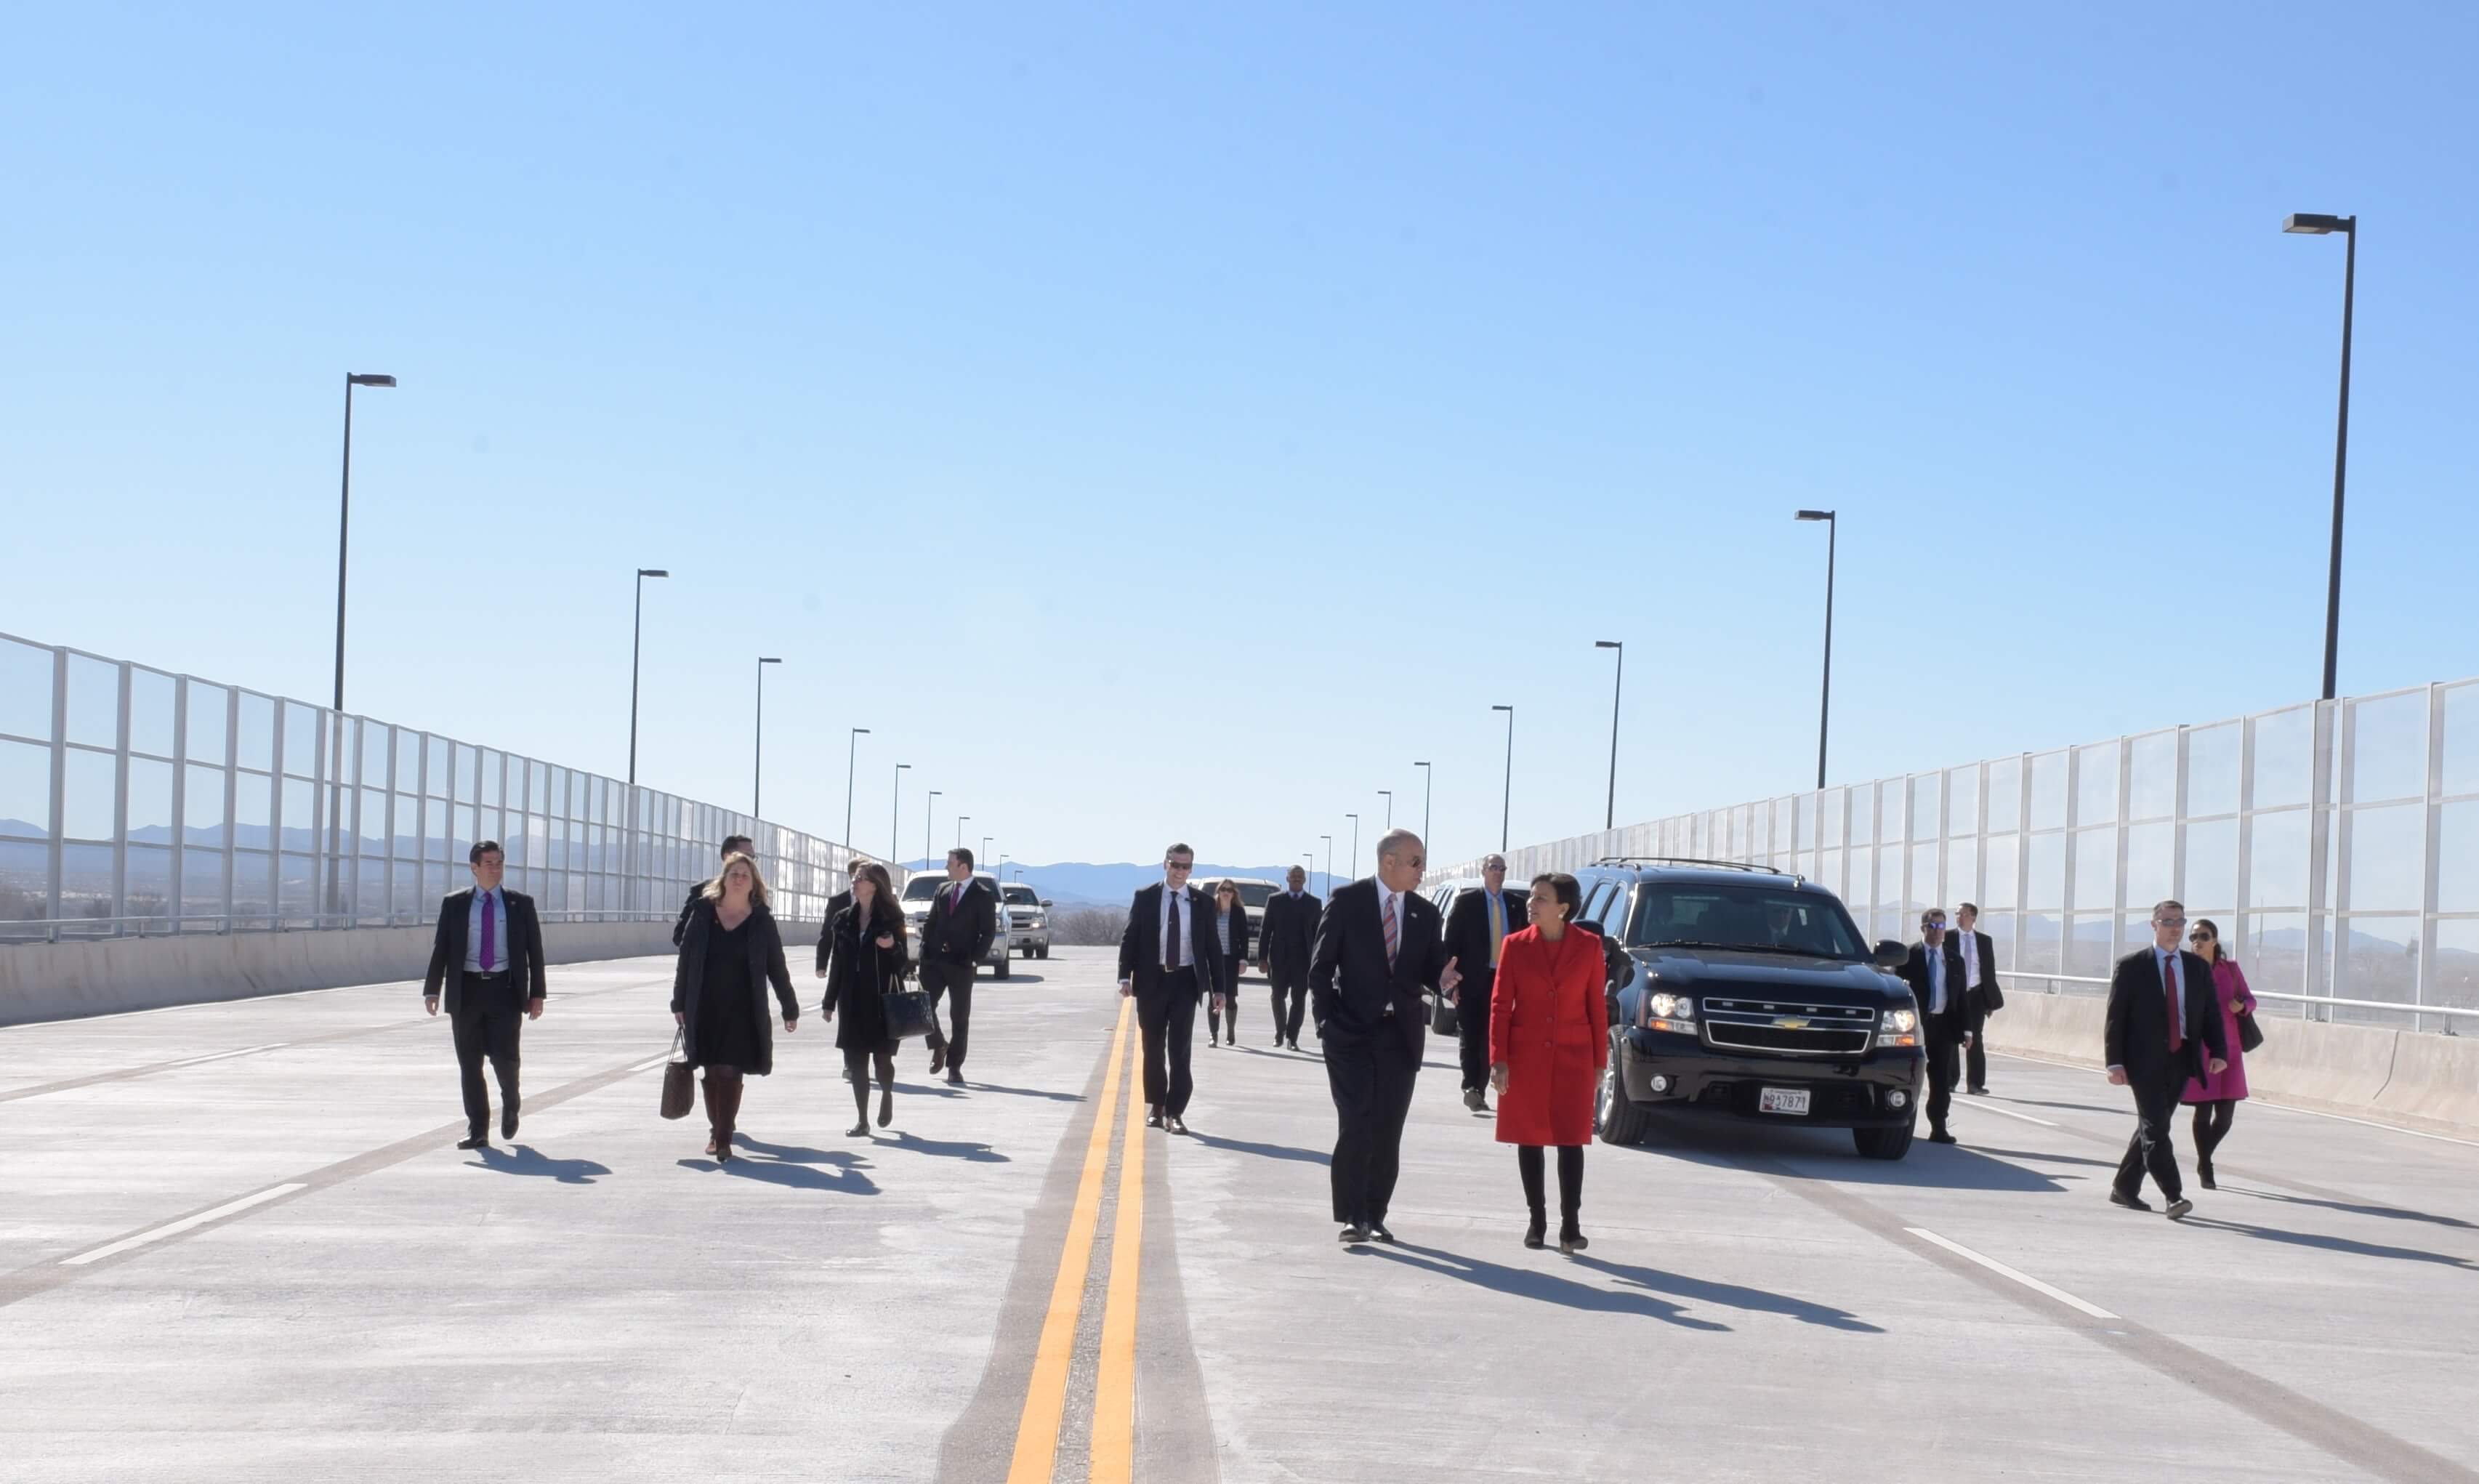 This 2016 photo shows officials at the Port of Entry on the U.S./Mexico border in Tornillo, Texas.